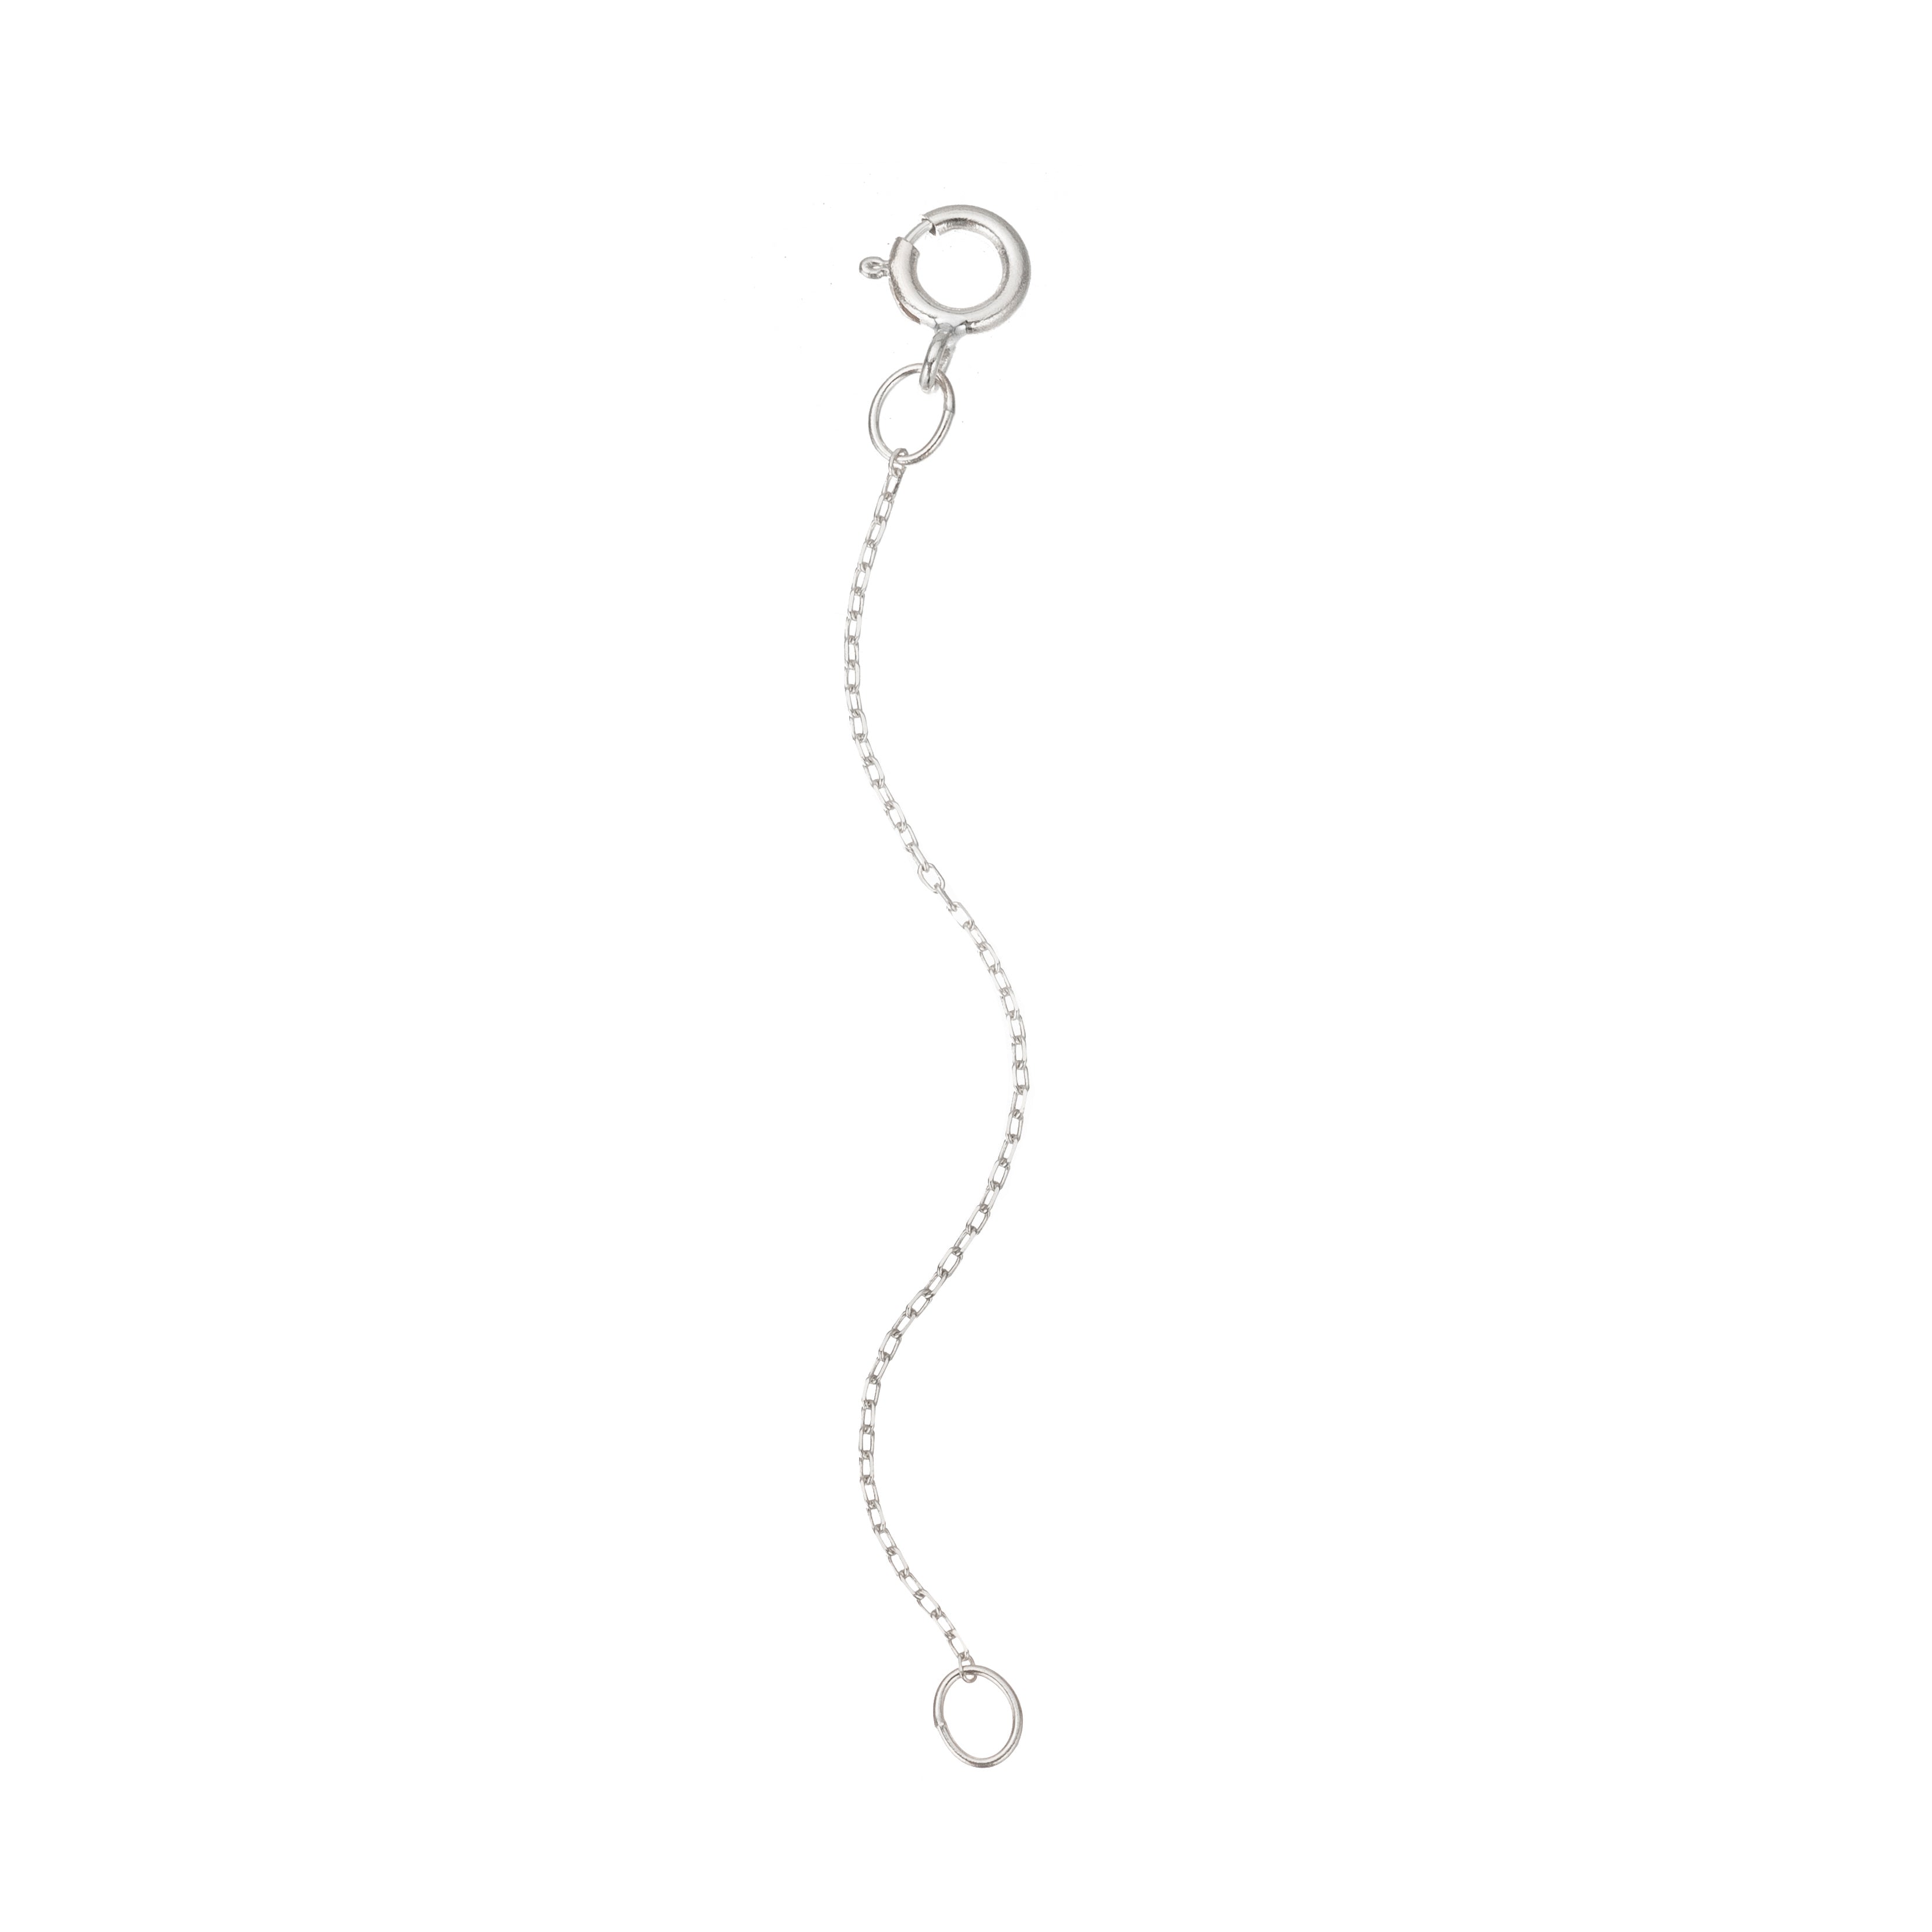  Sterling Silver Necklace Extender Chain Extender for